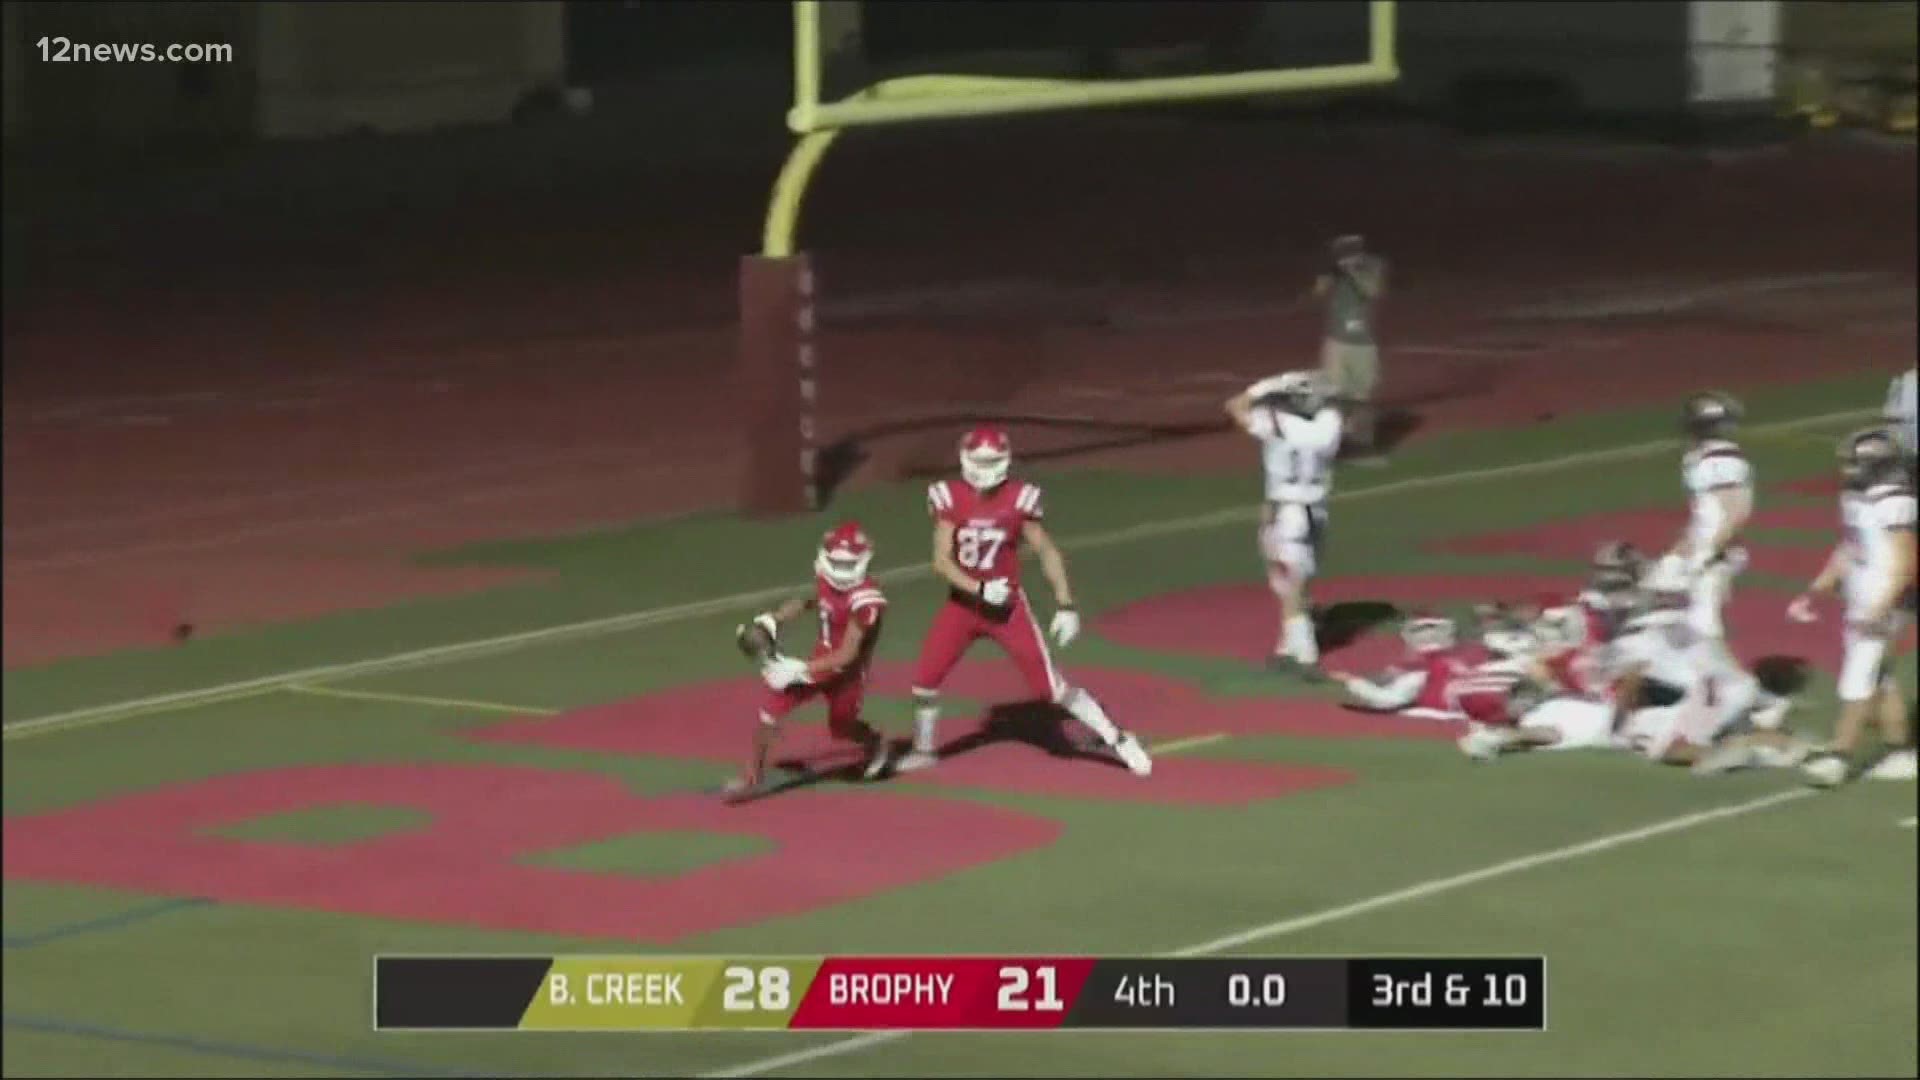 Could you believe the Brophy High School Hail Mary? It might be the Arizona high school football play of the year.